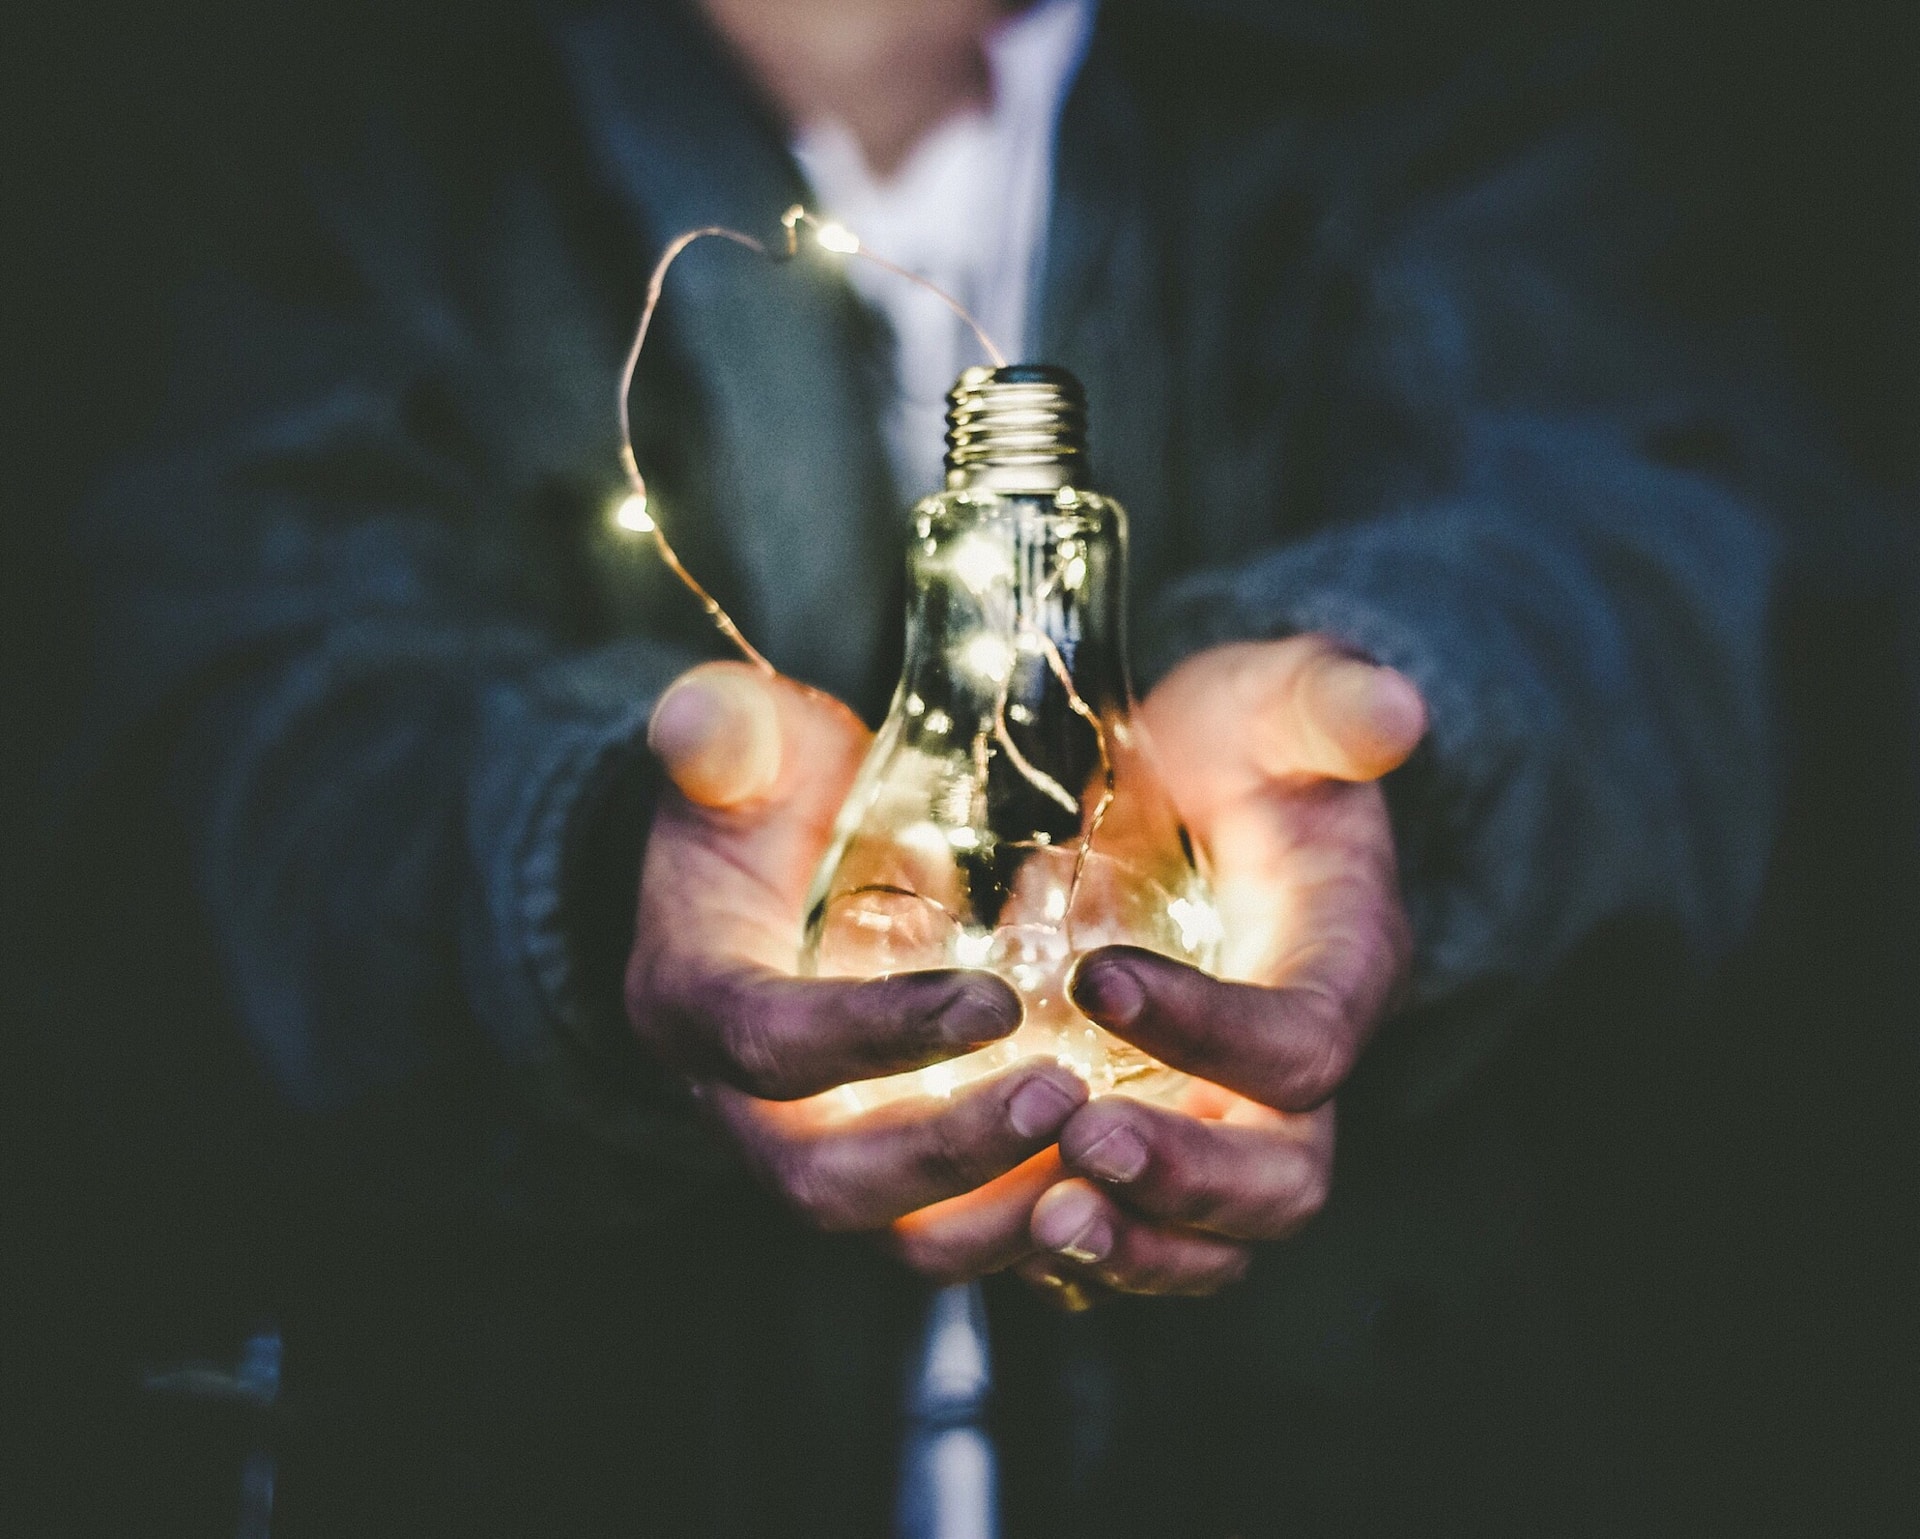 A person holding a light bulb, channeling their creativity to boost innovation in international trade.